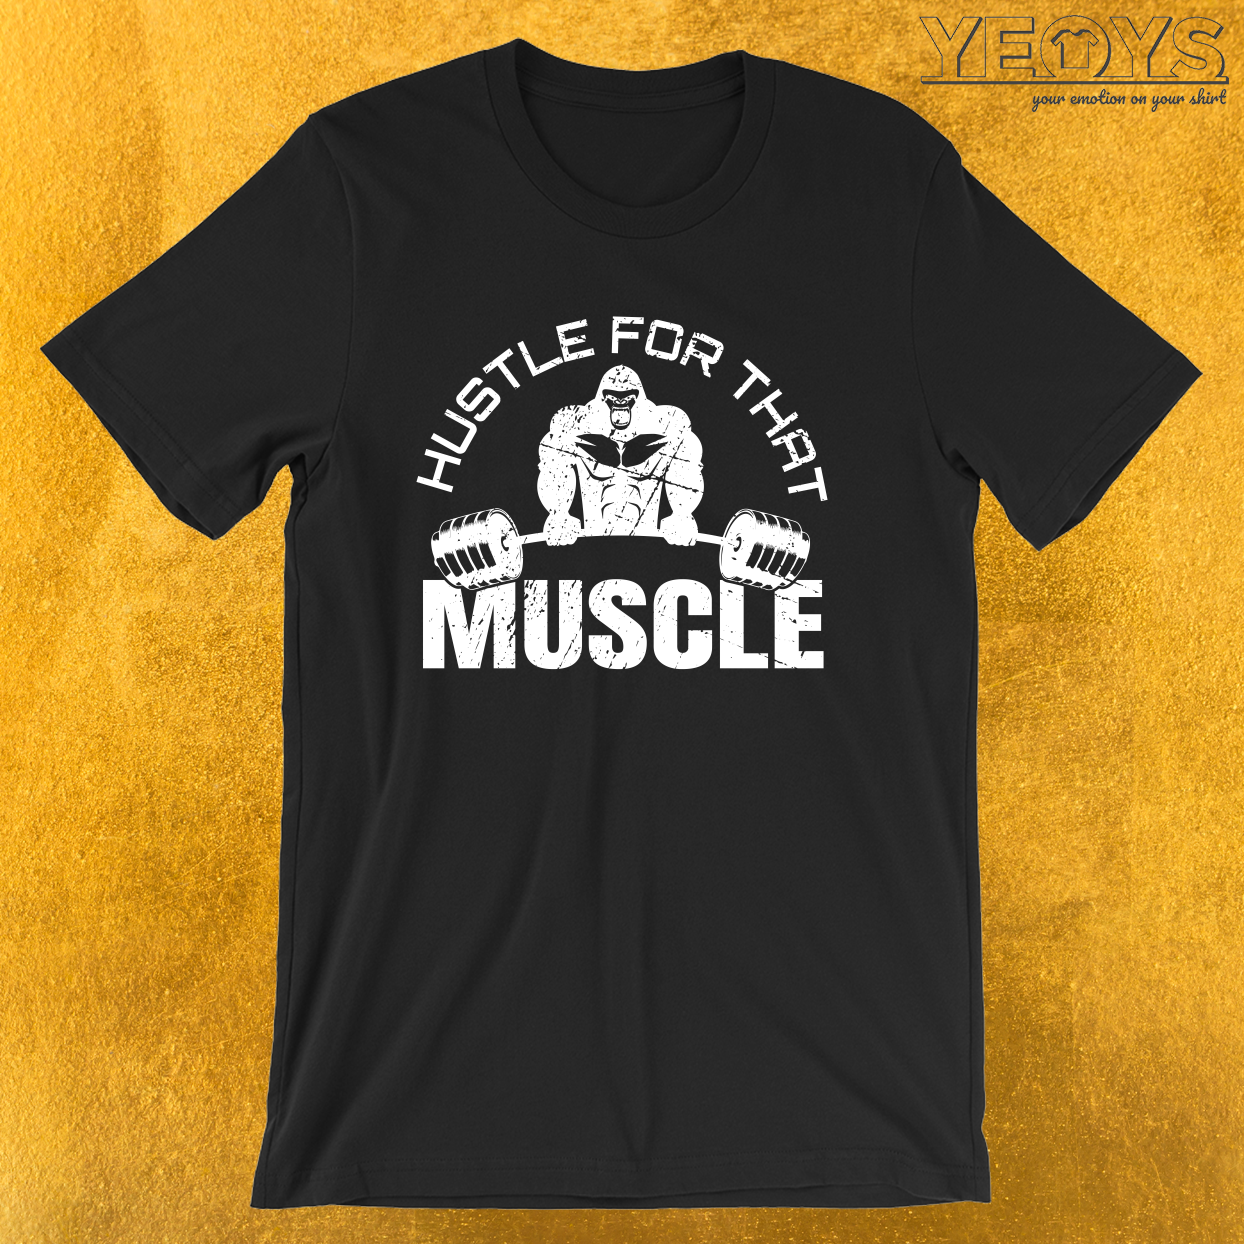 Weightlifting – Hustle For That Muscle Tee